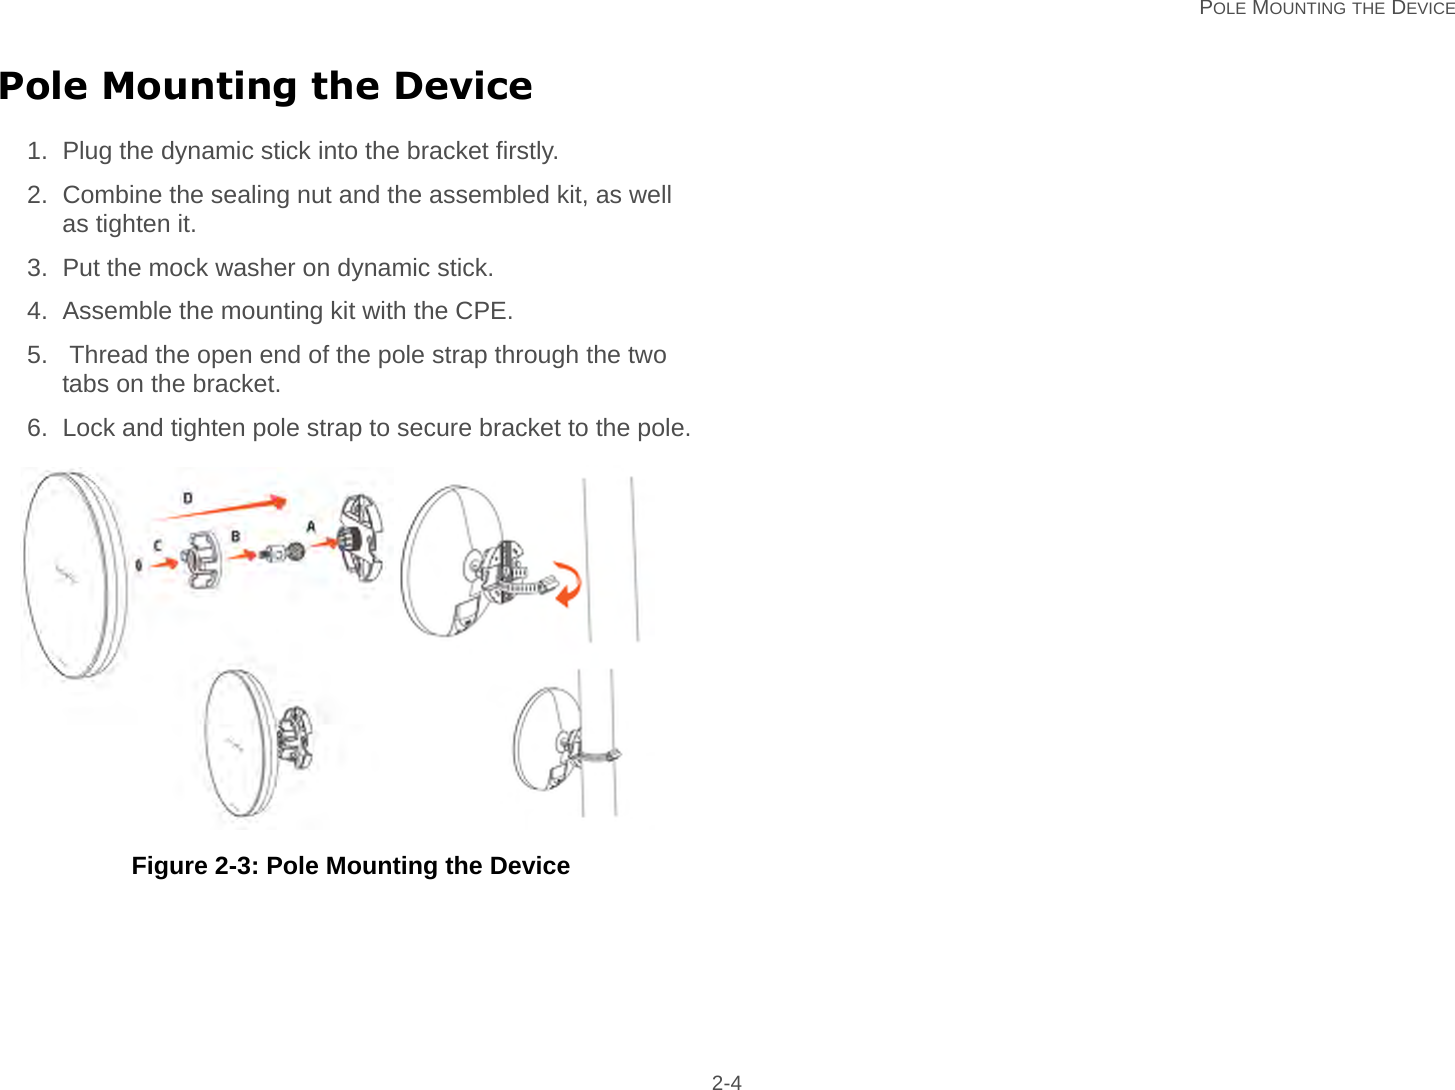   POLE MOUNTING THE DEVICE 2-4Pole Mounting the Device1. Plug the dynamic stick into the bracket firstly.2. Combine the sealing nut and the assembled kit, as well as tighten it.3. Put the mock washer on dynamic stick.4. Assemble the mounting kit with the CPE.5.  Thread the open end of the pole strap through the two tabs on the bracket.6. Lock and tighten pole strap to secure bracket to the pole.    Figure 2-3: Pole Mounting the Device